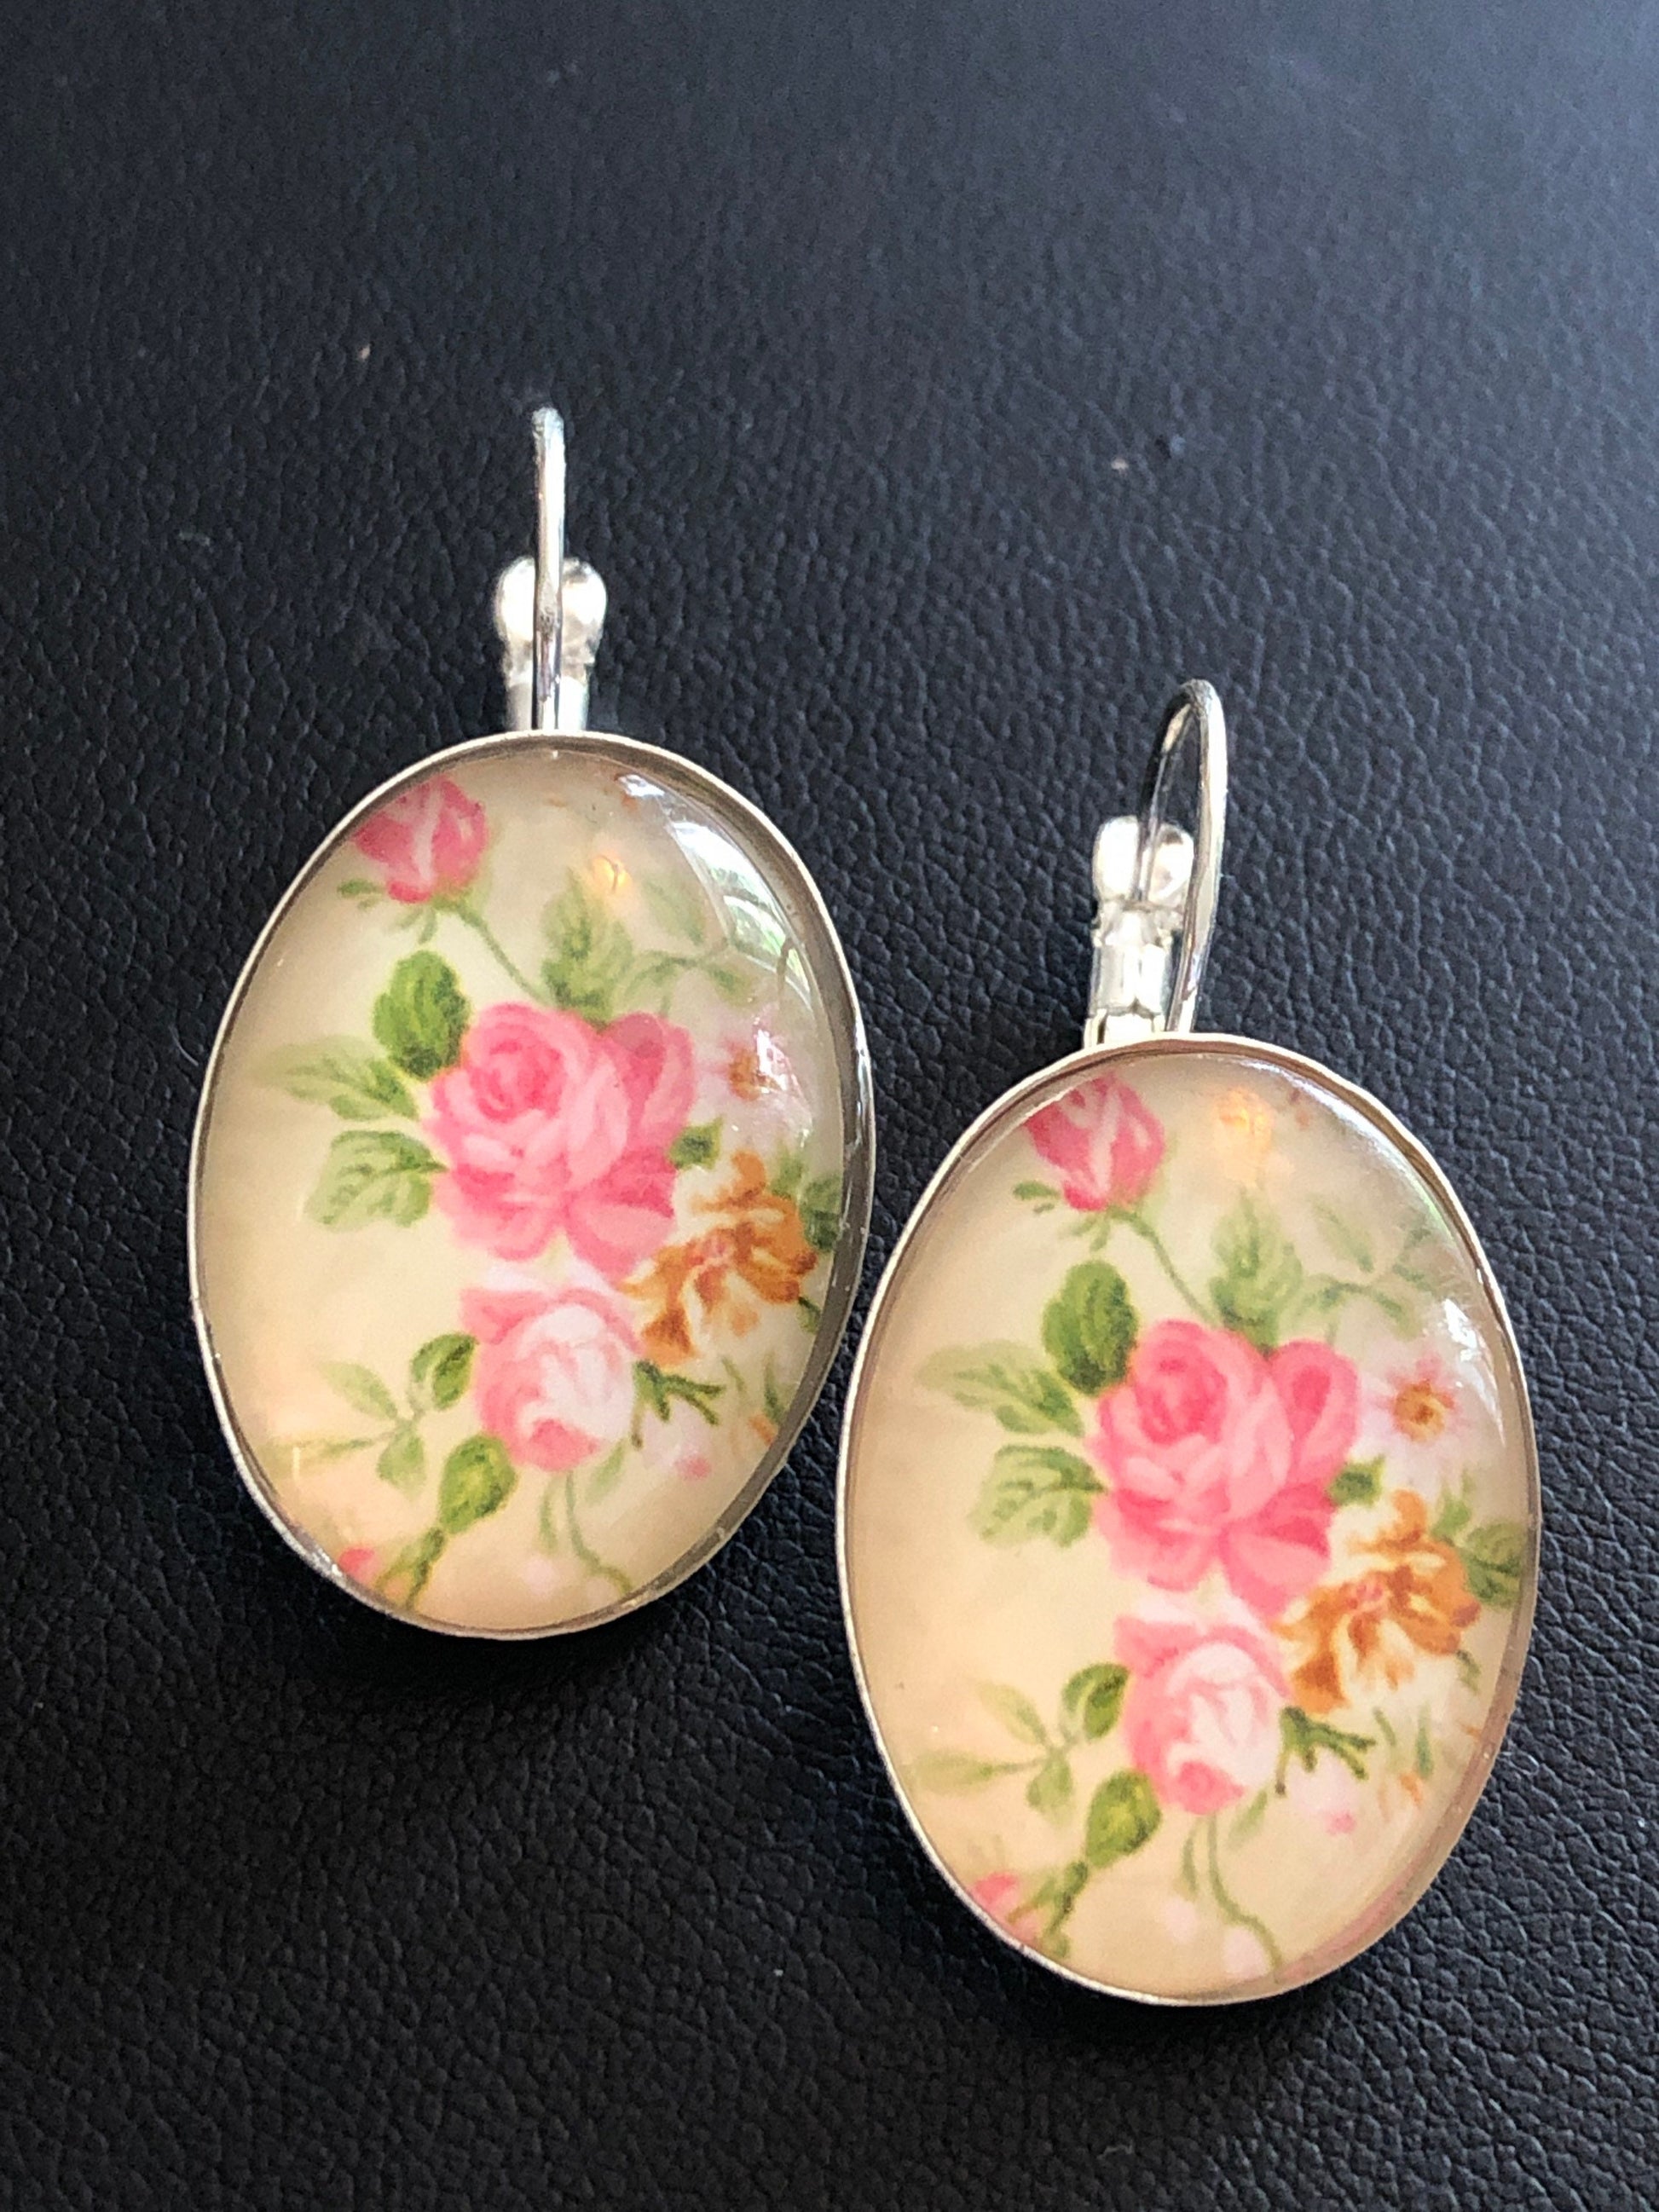 Pink roses Spring garden flowers oval glass cabochon floral earrings